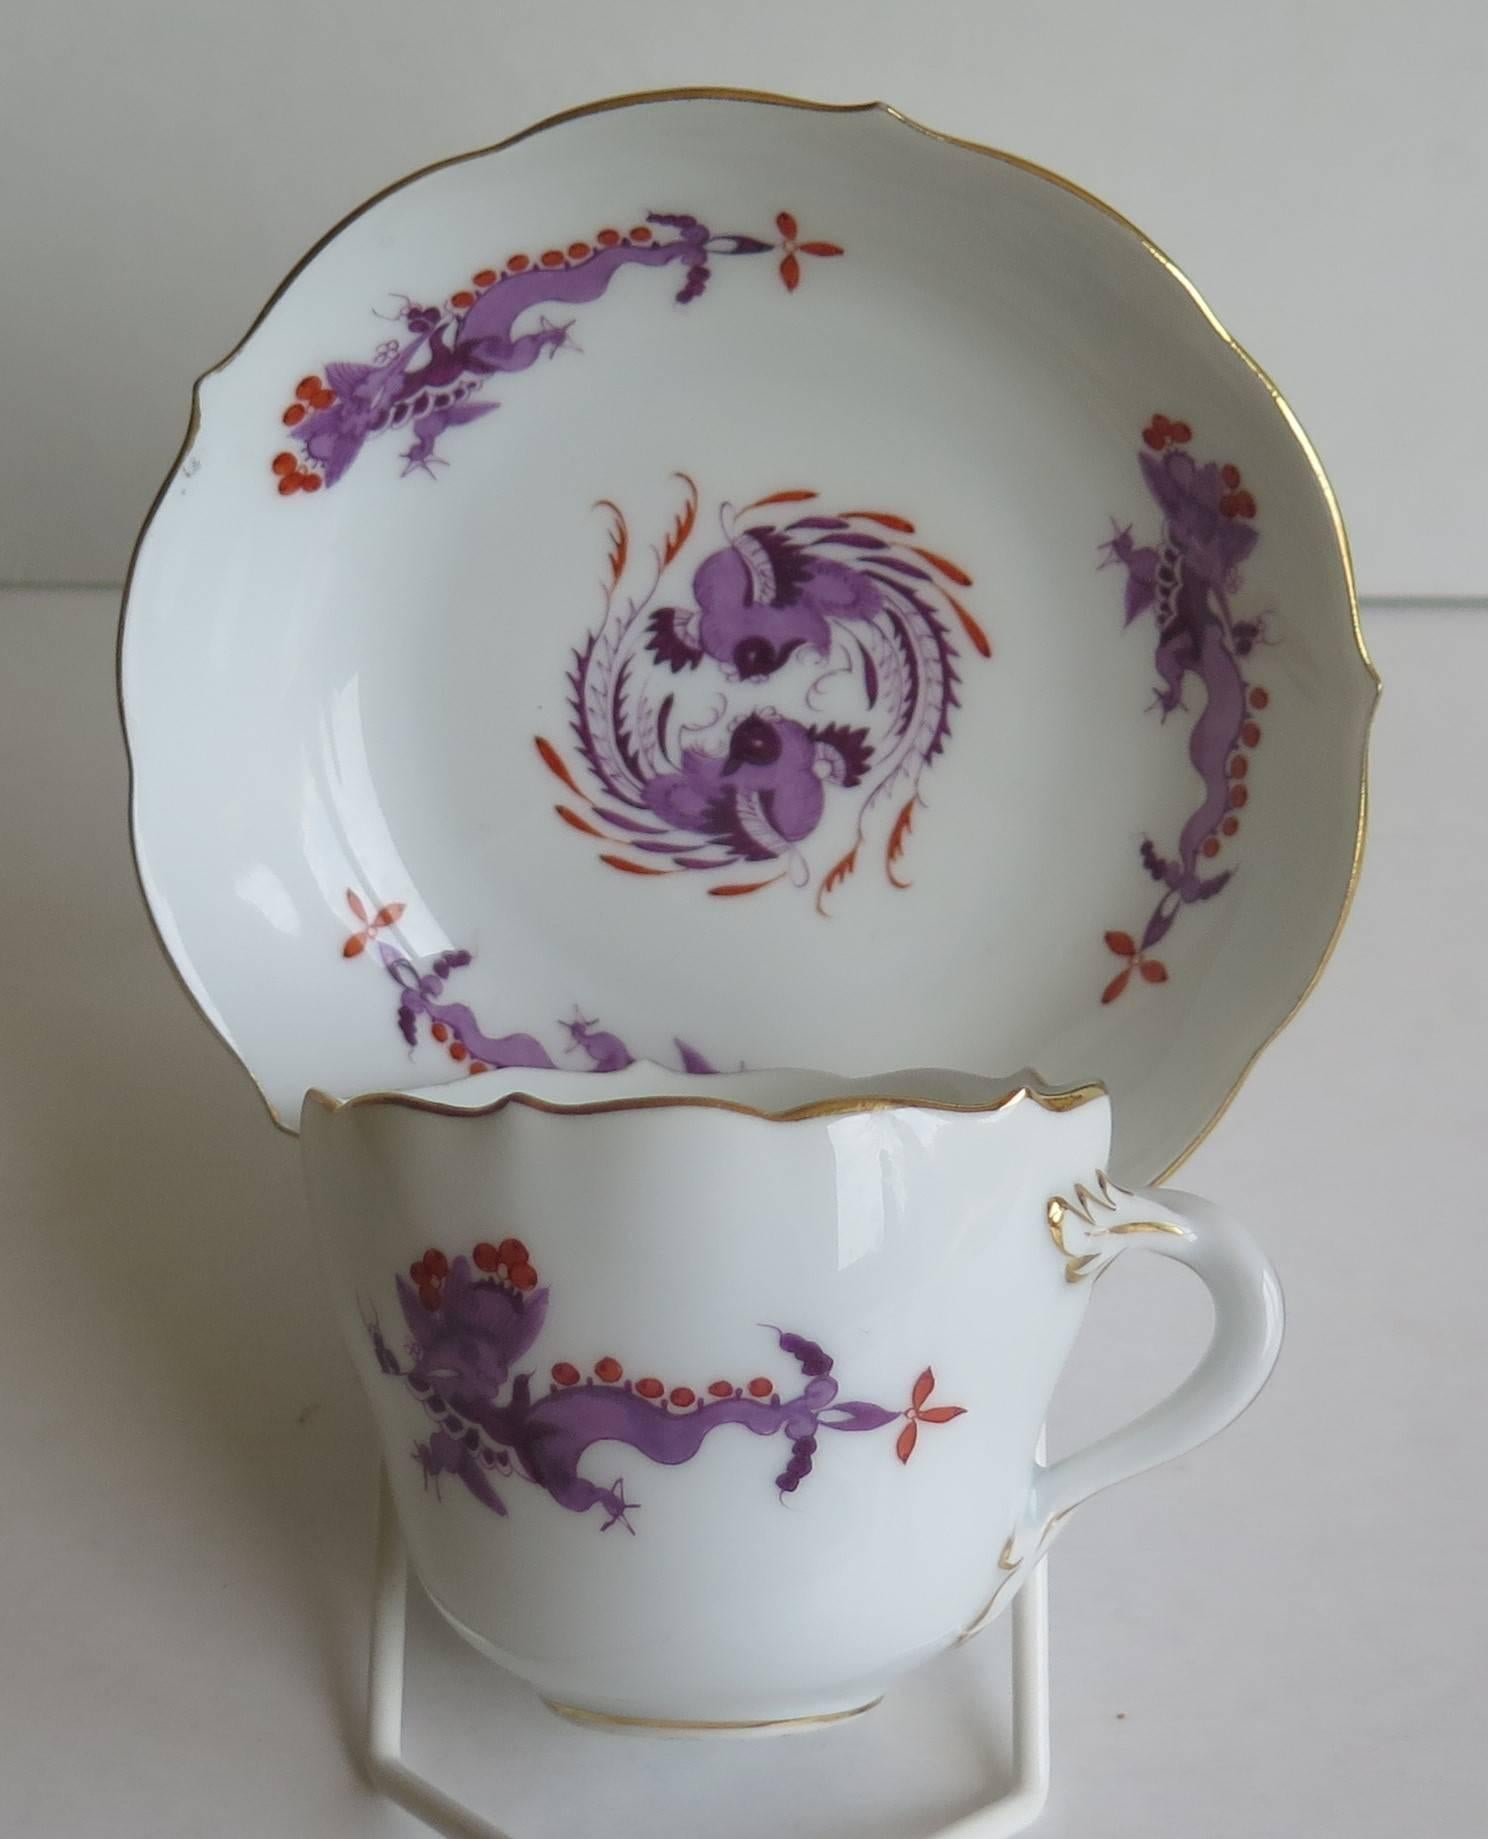 This is a small demitasse cup and saucer by the Meissen factory in fine white porcelain.

The cup and saucer both have wavy edges and the cup has a twisted branch handle with leaf attachments. They are beautifully decorated in a multi shaded purple